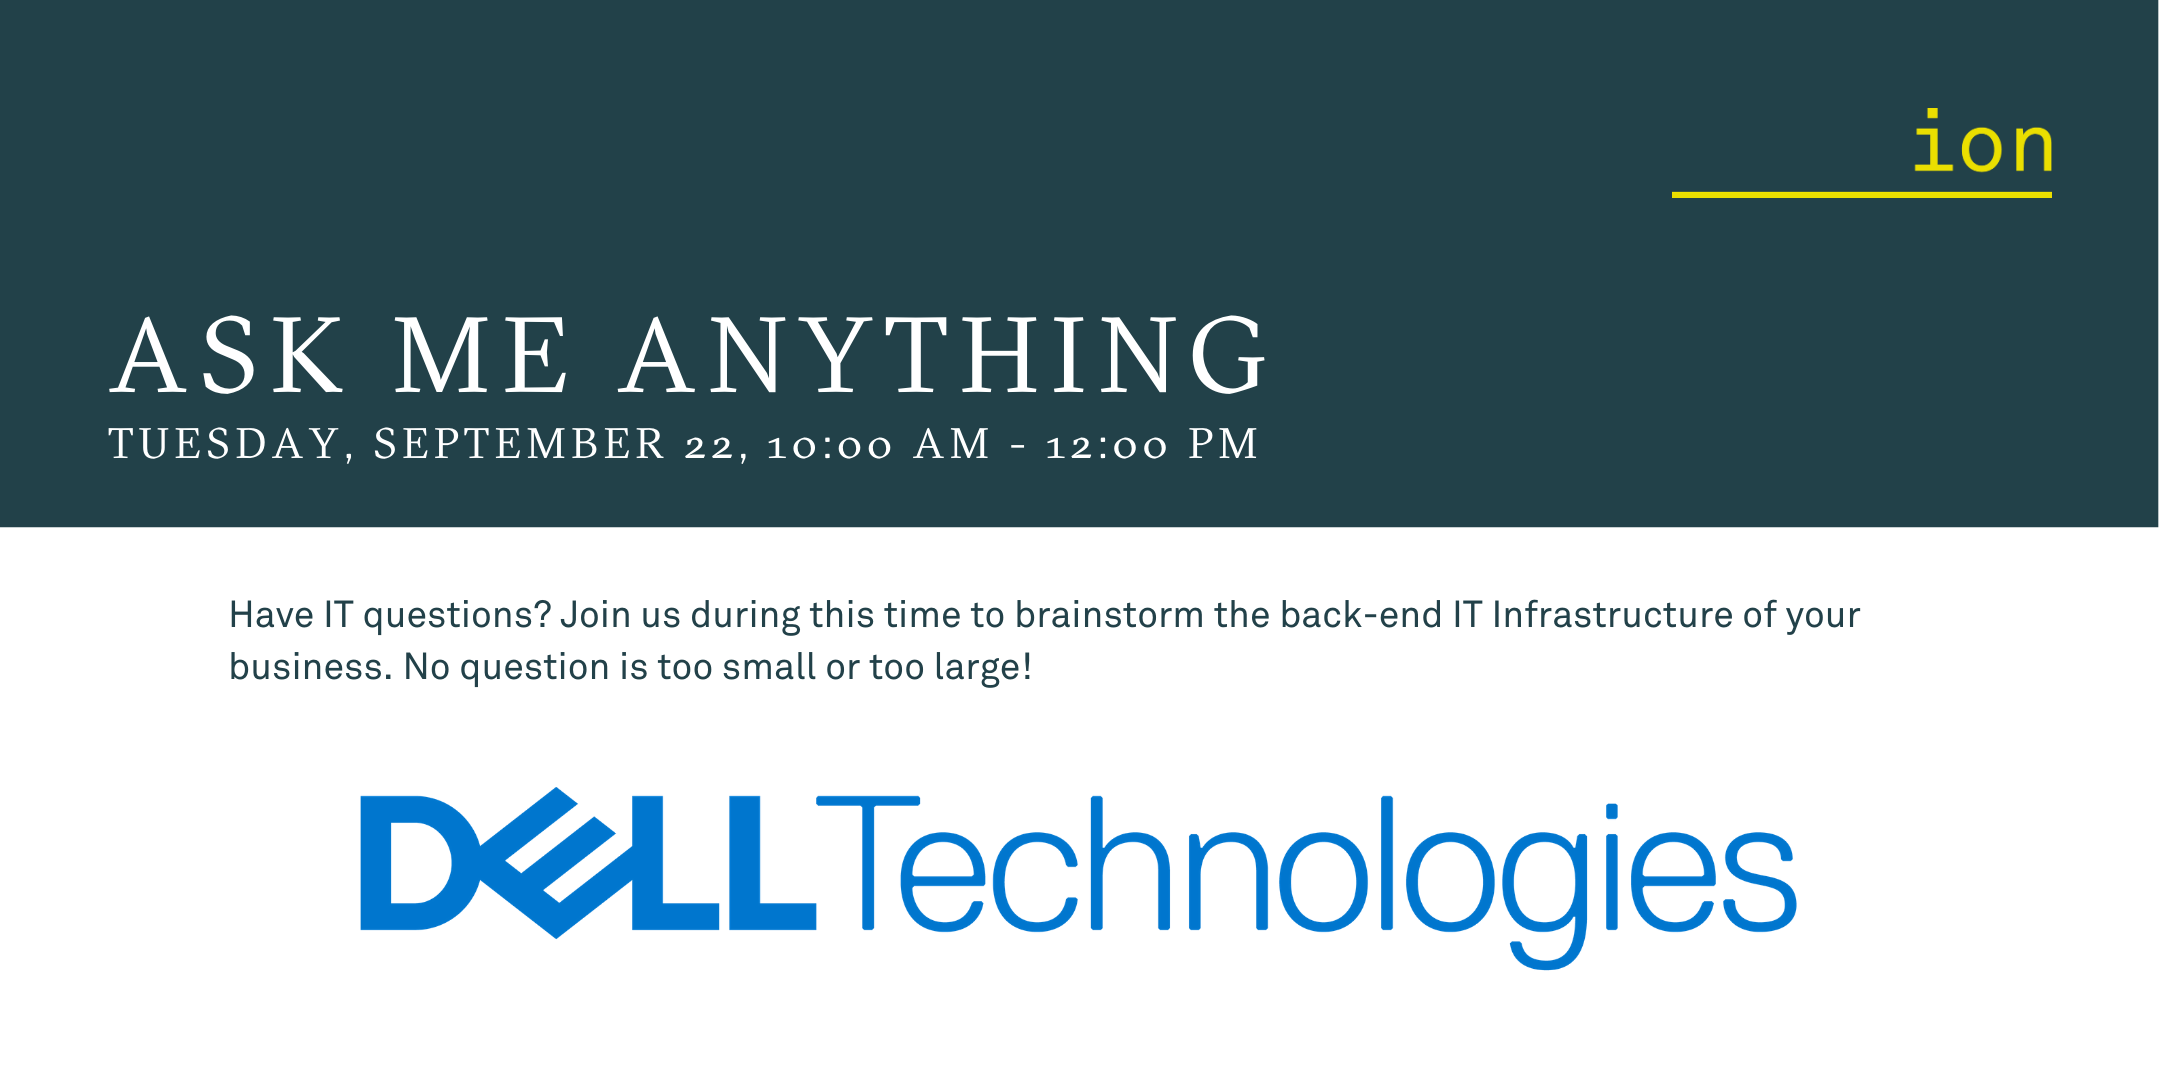 Ask Me Anything | Dell Technologies